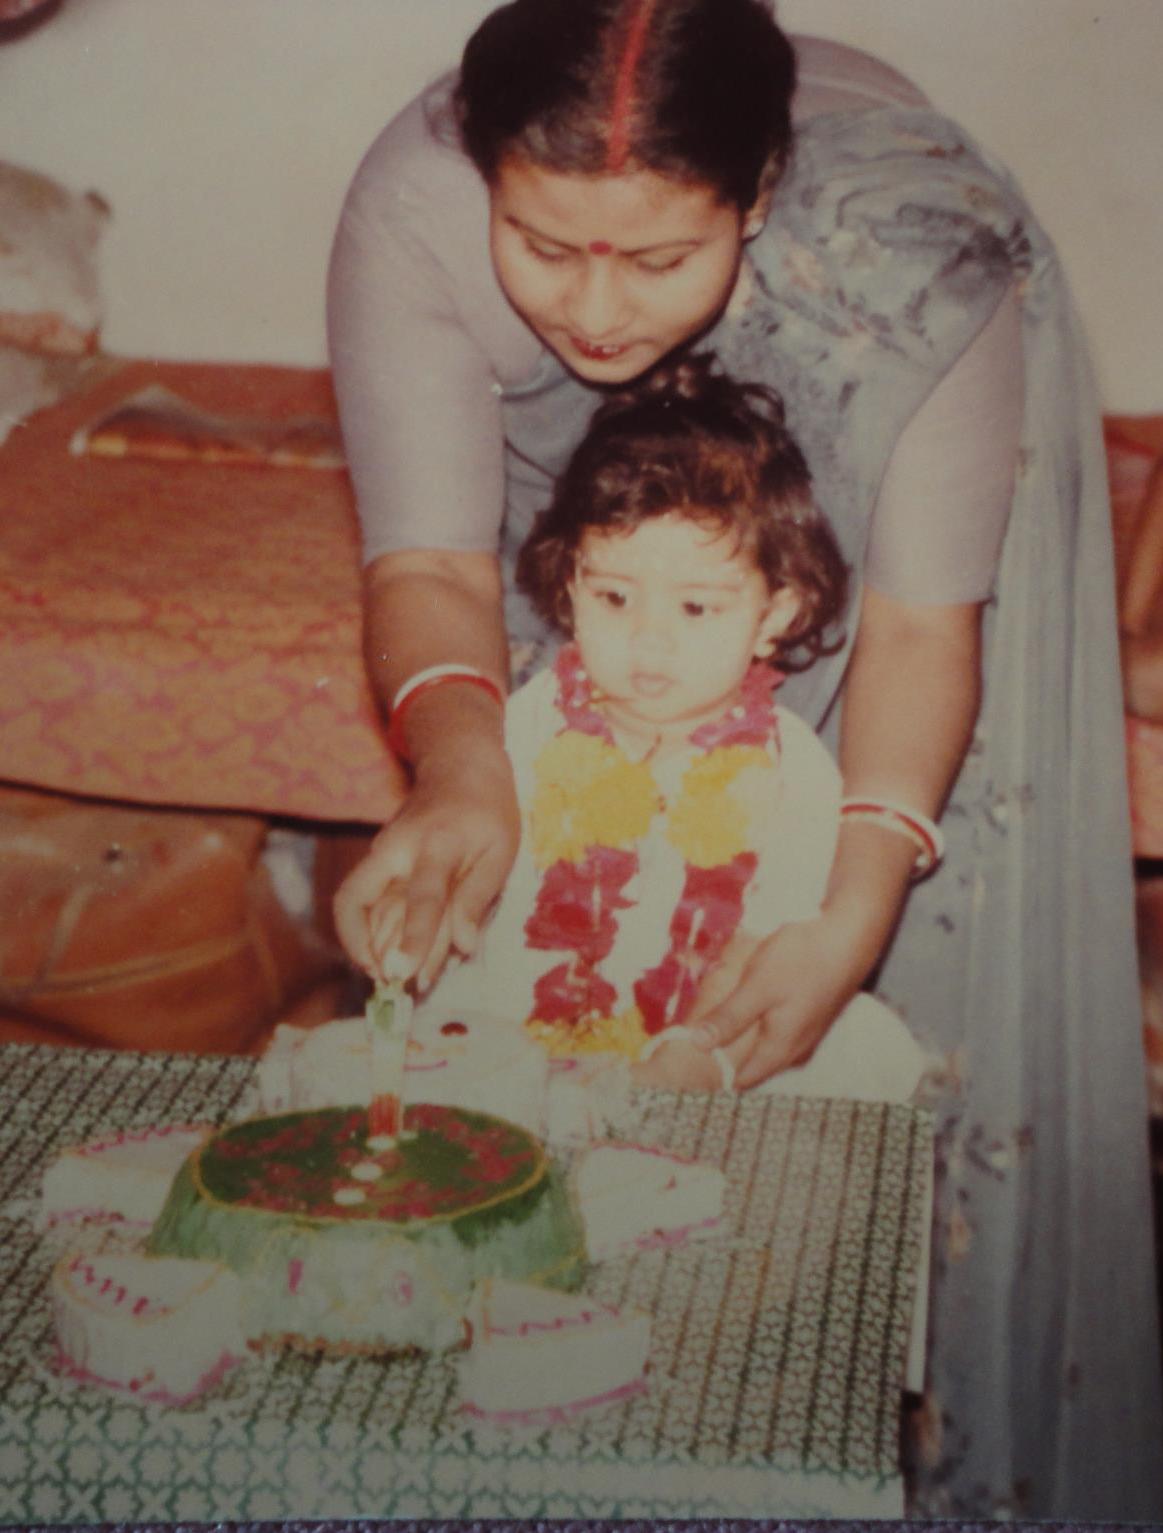 Mitali cutting the cake at her first birthday with the help of a family member.